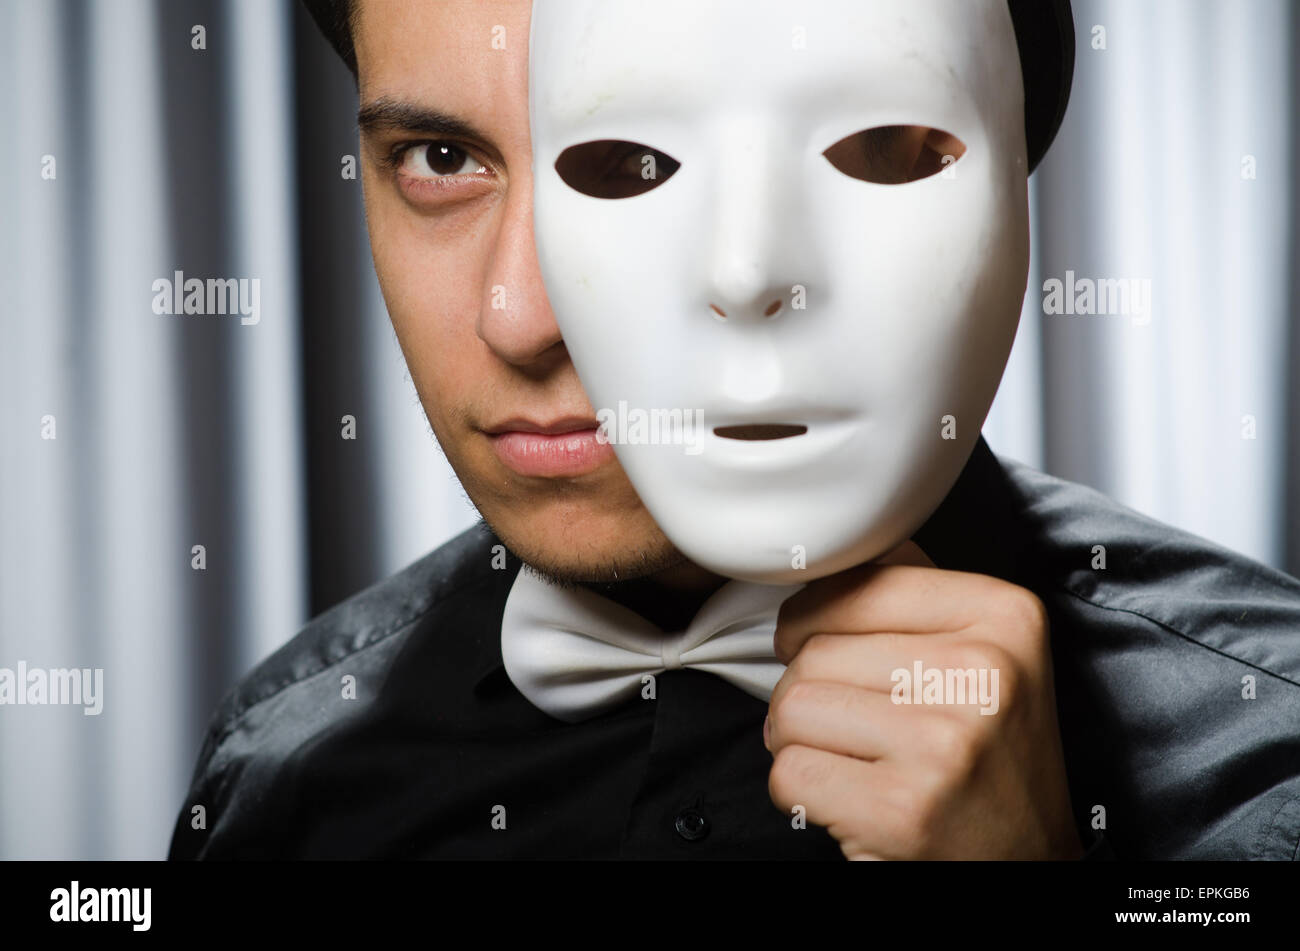 Funny concept with theatrical mask Stock Photo - Alamy